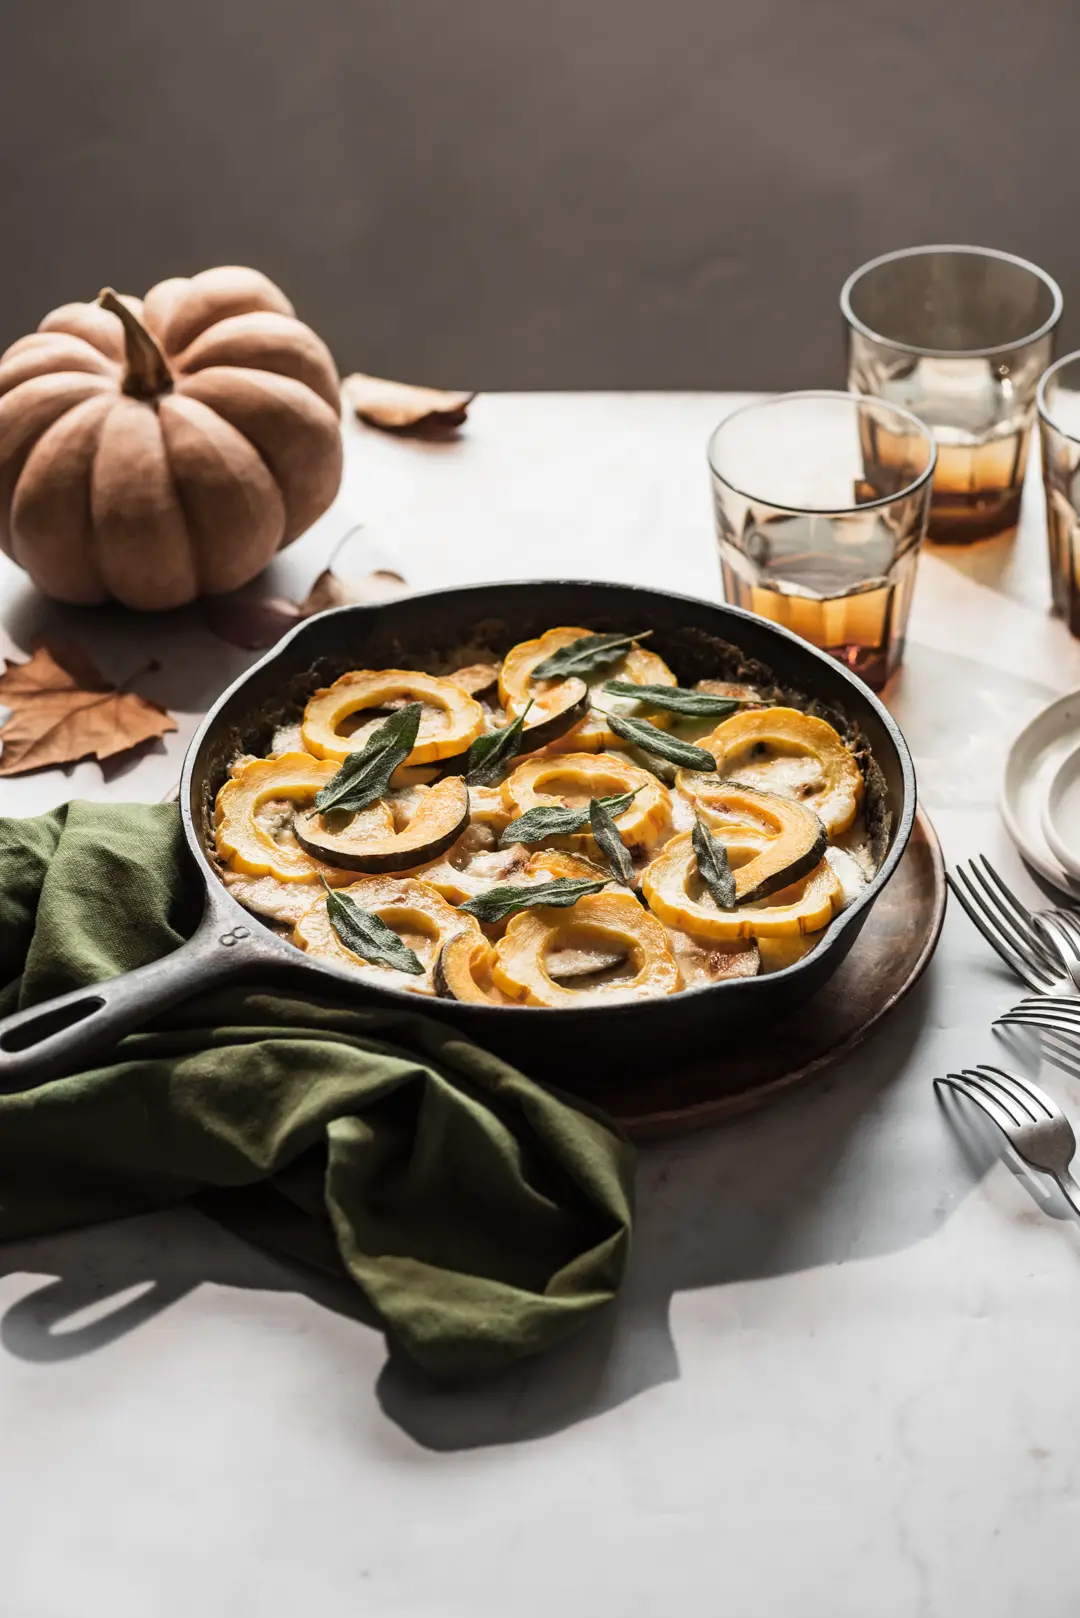 This creamy, cheesy winter squash au gratin topped with crispy sage leaves is a delicious vegetarian main course or side dish to a roast.